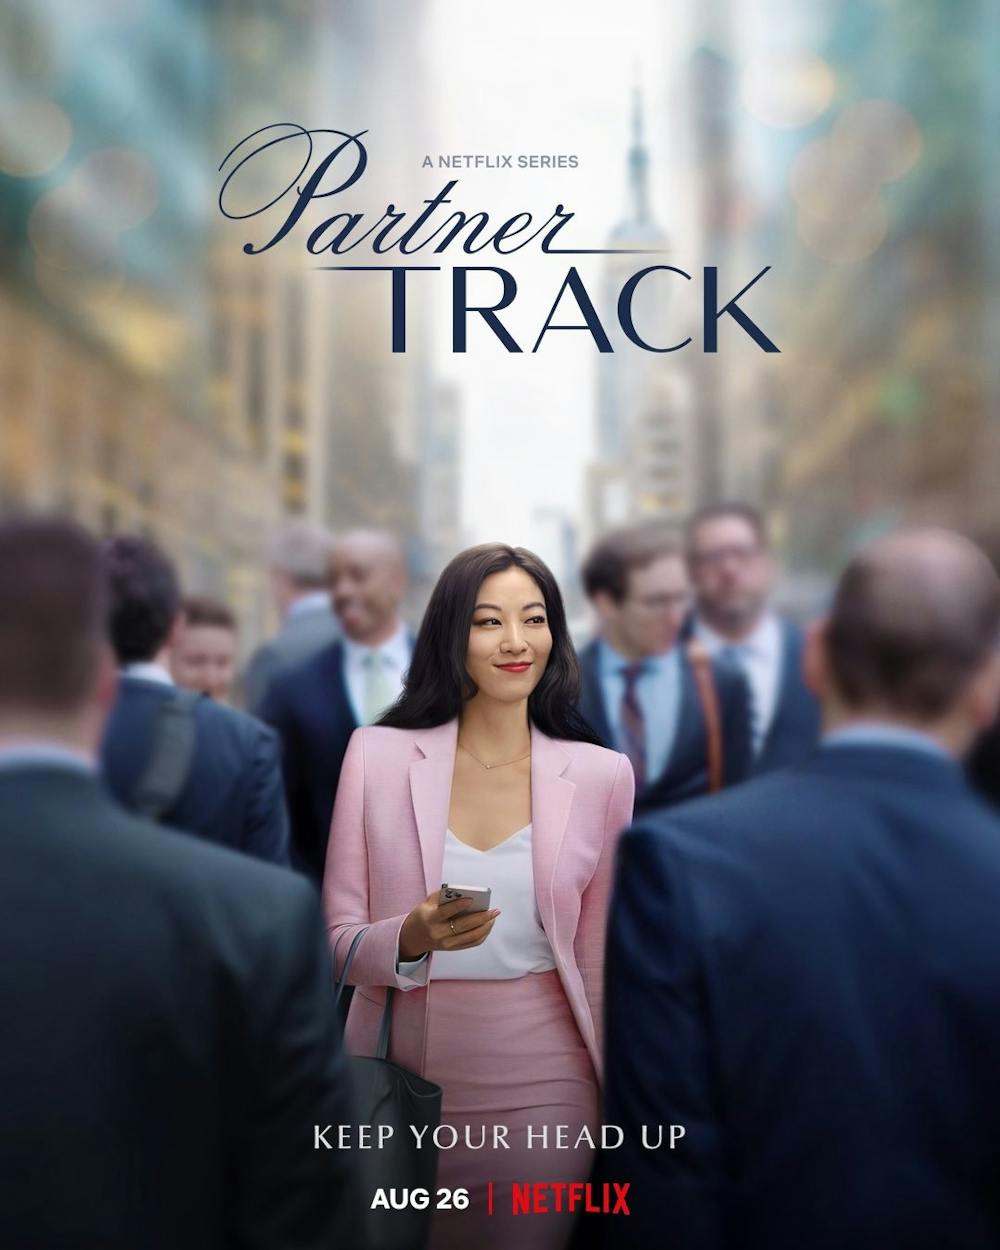 Review: The Partner Track is one of Netflix's must watch drama shows